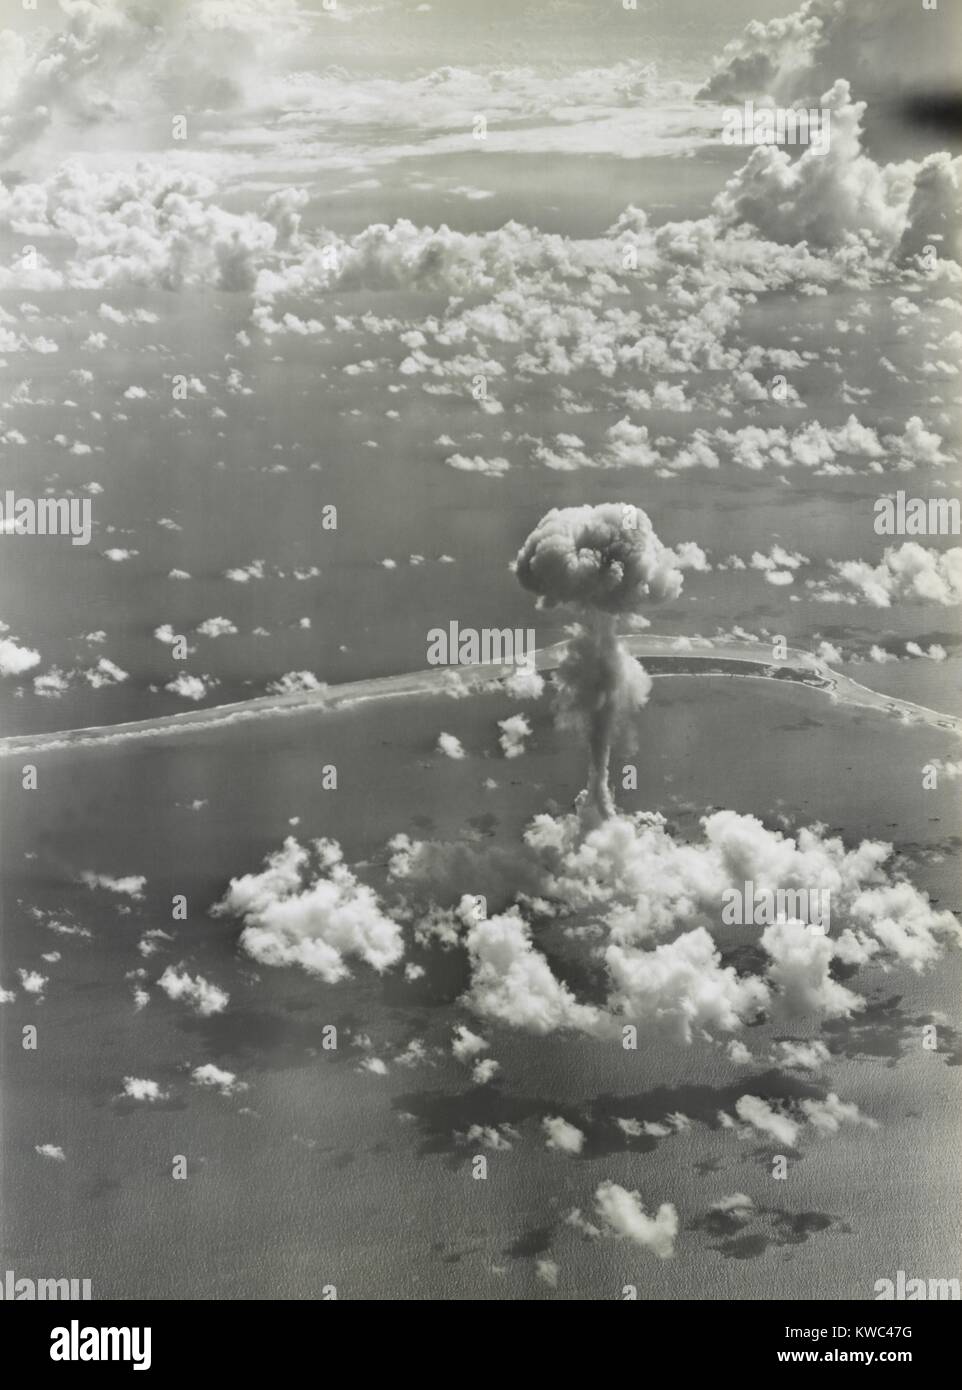 The ABLE test of Operation Crossroads, July 1, 1946. The bomb was dropped from a B-29 and detonated at 520 feet. It was the first nuclear explosion since the Nagasaki bomb of Aug. 9, 1945. ABLE had the force of 20,000 tons of TNT. (BSLOC 2015 2 1) Stock Photo